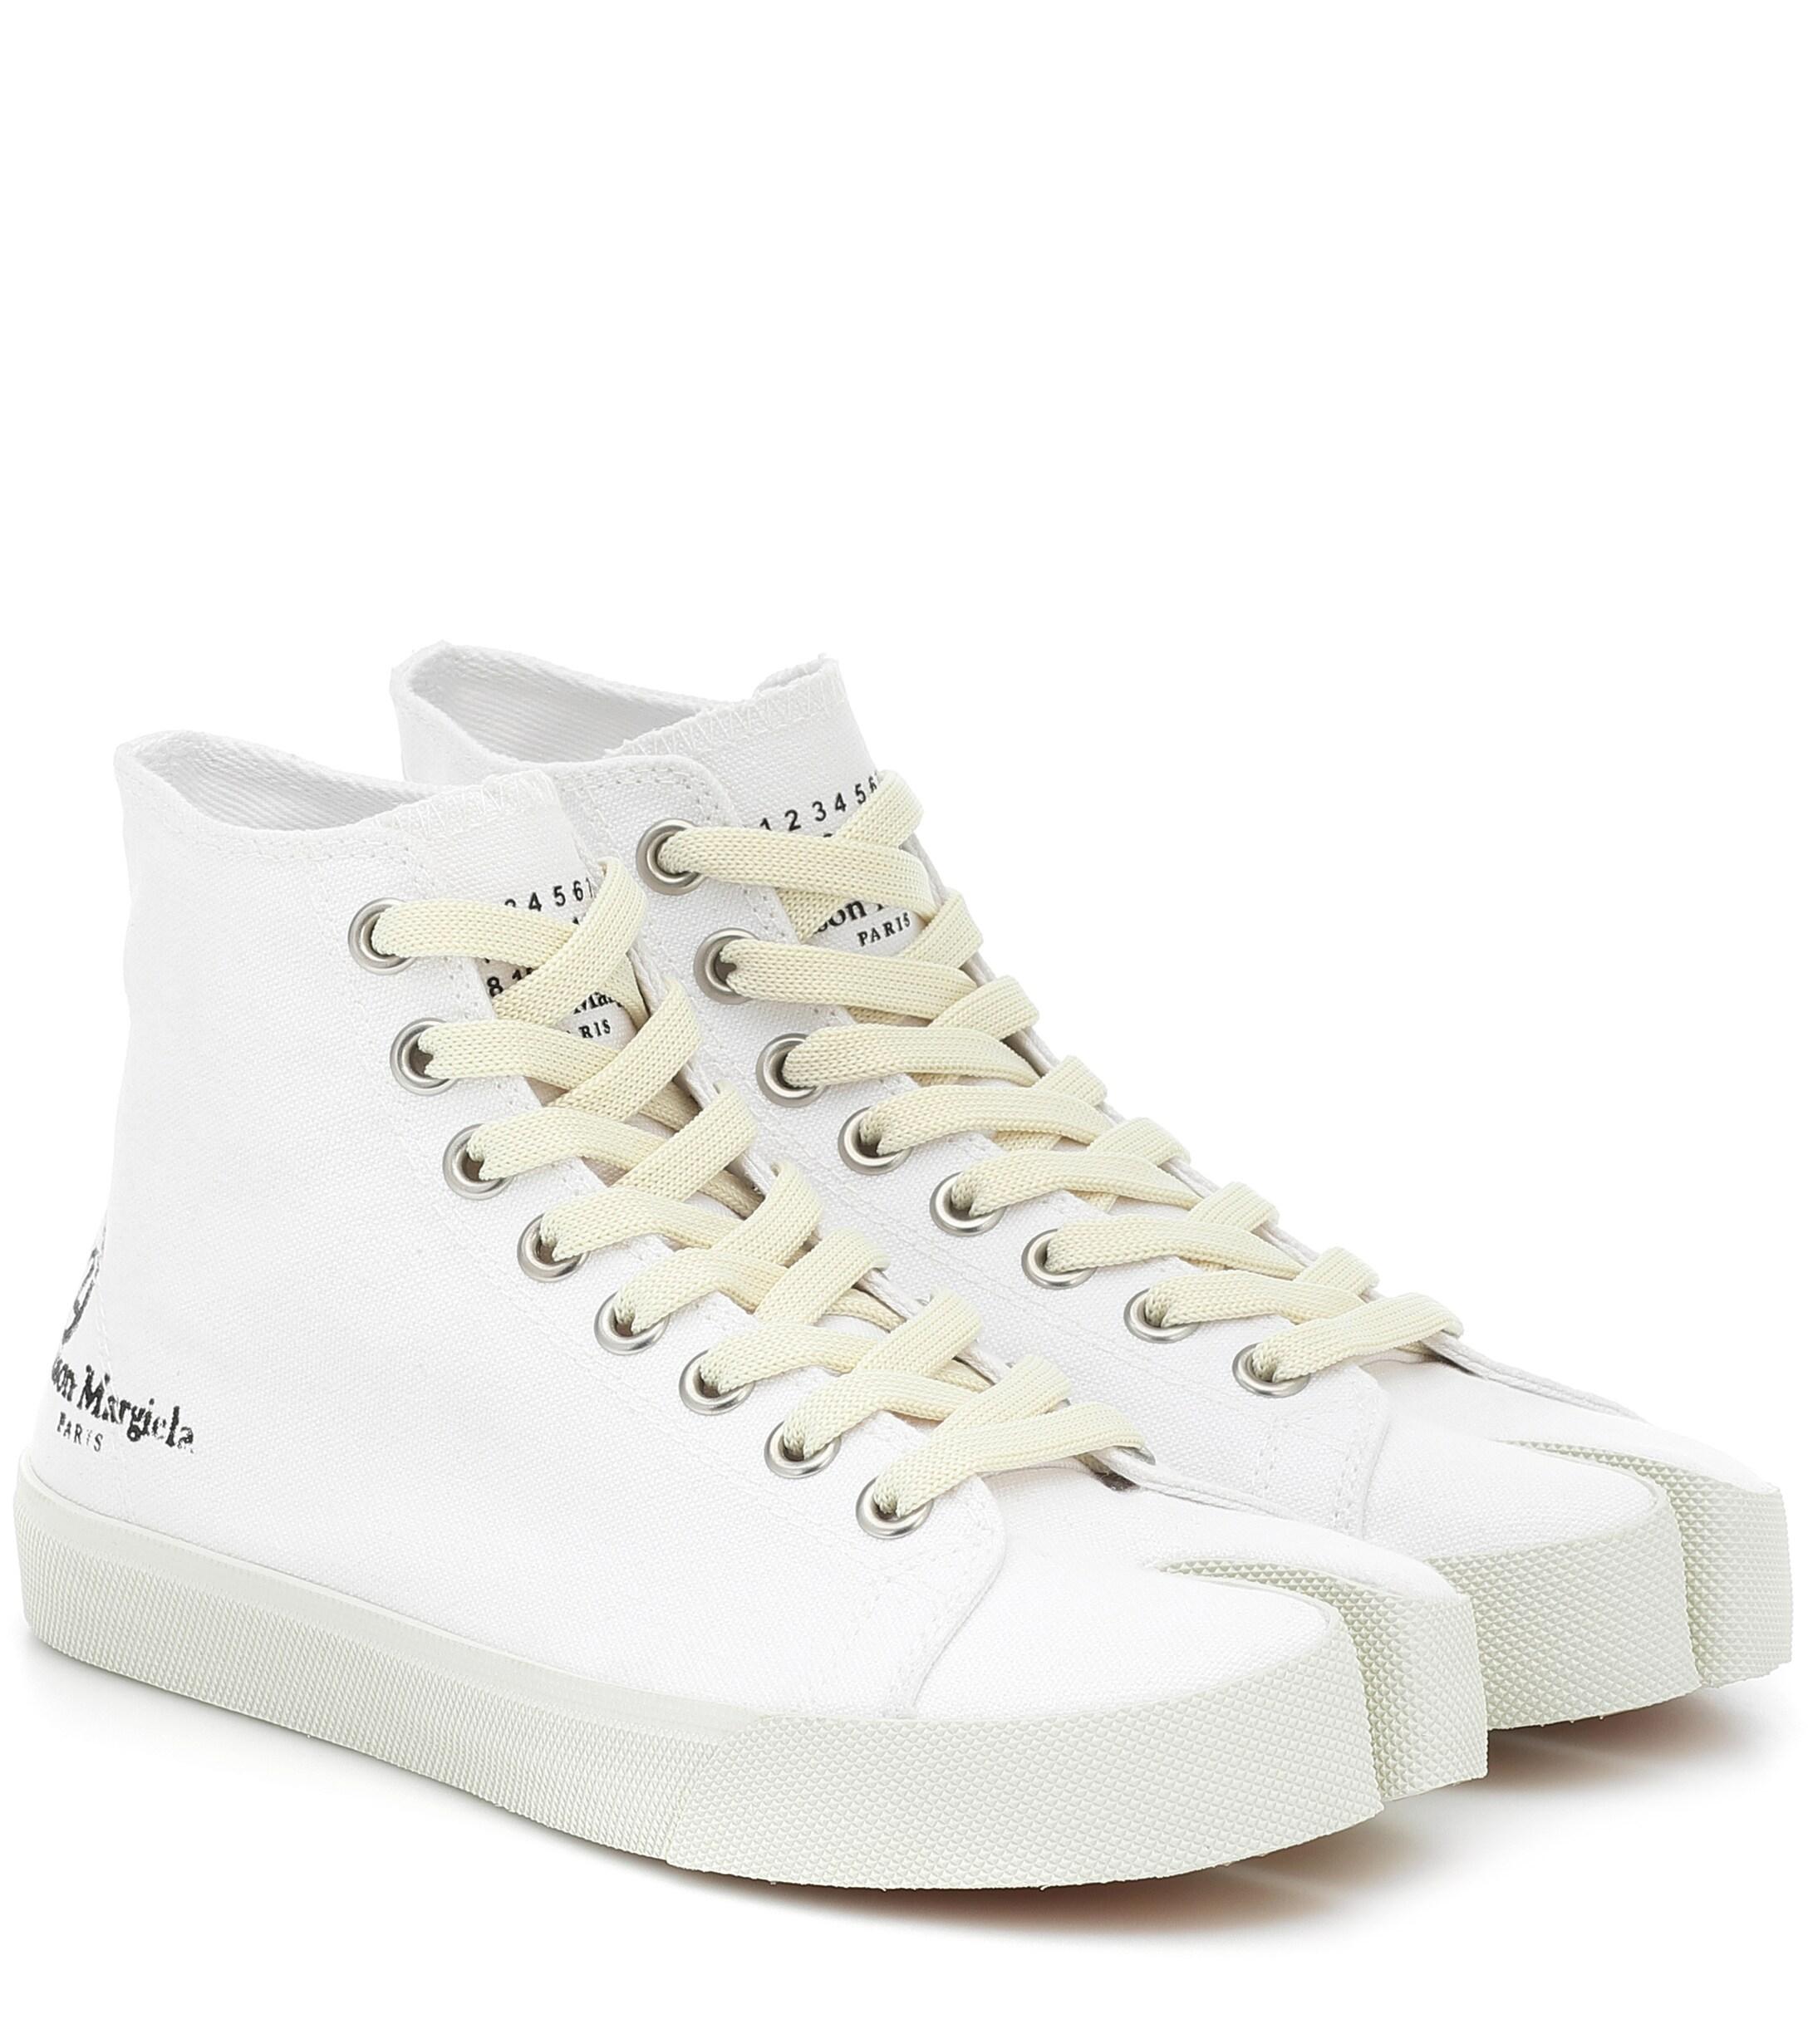 Maison Margiela Tabi Canvas High-top Sneakers in White - Lyst